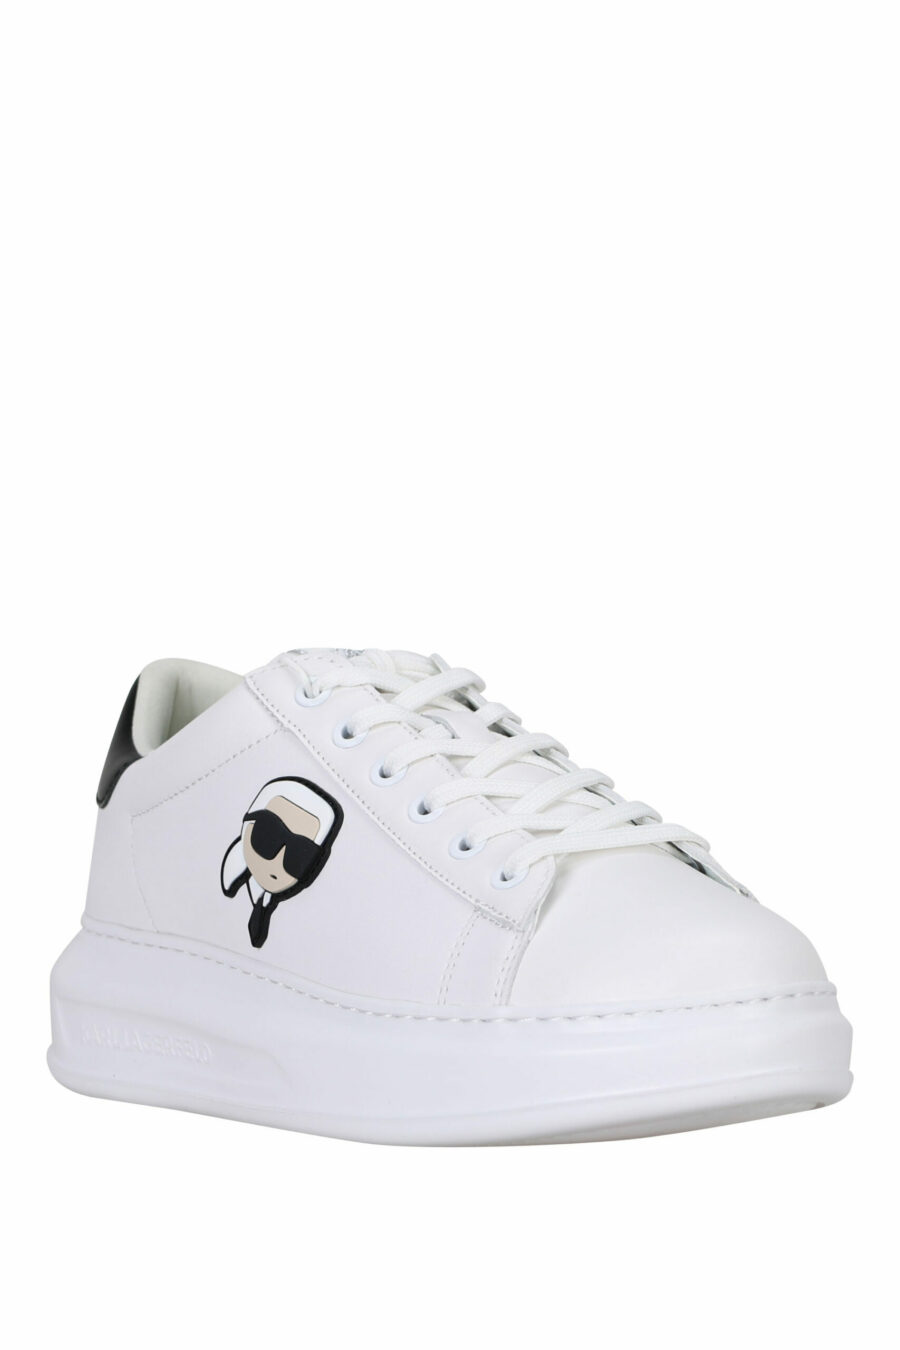 White leather trainers "kapri mens" with black detail and rubber "karl" minilogo - 5059529362347 1 scaled